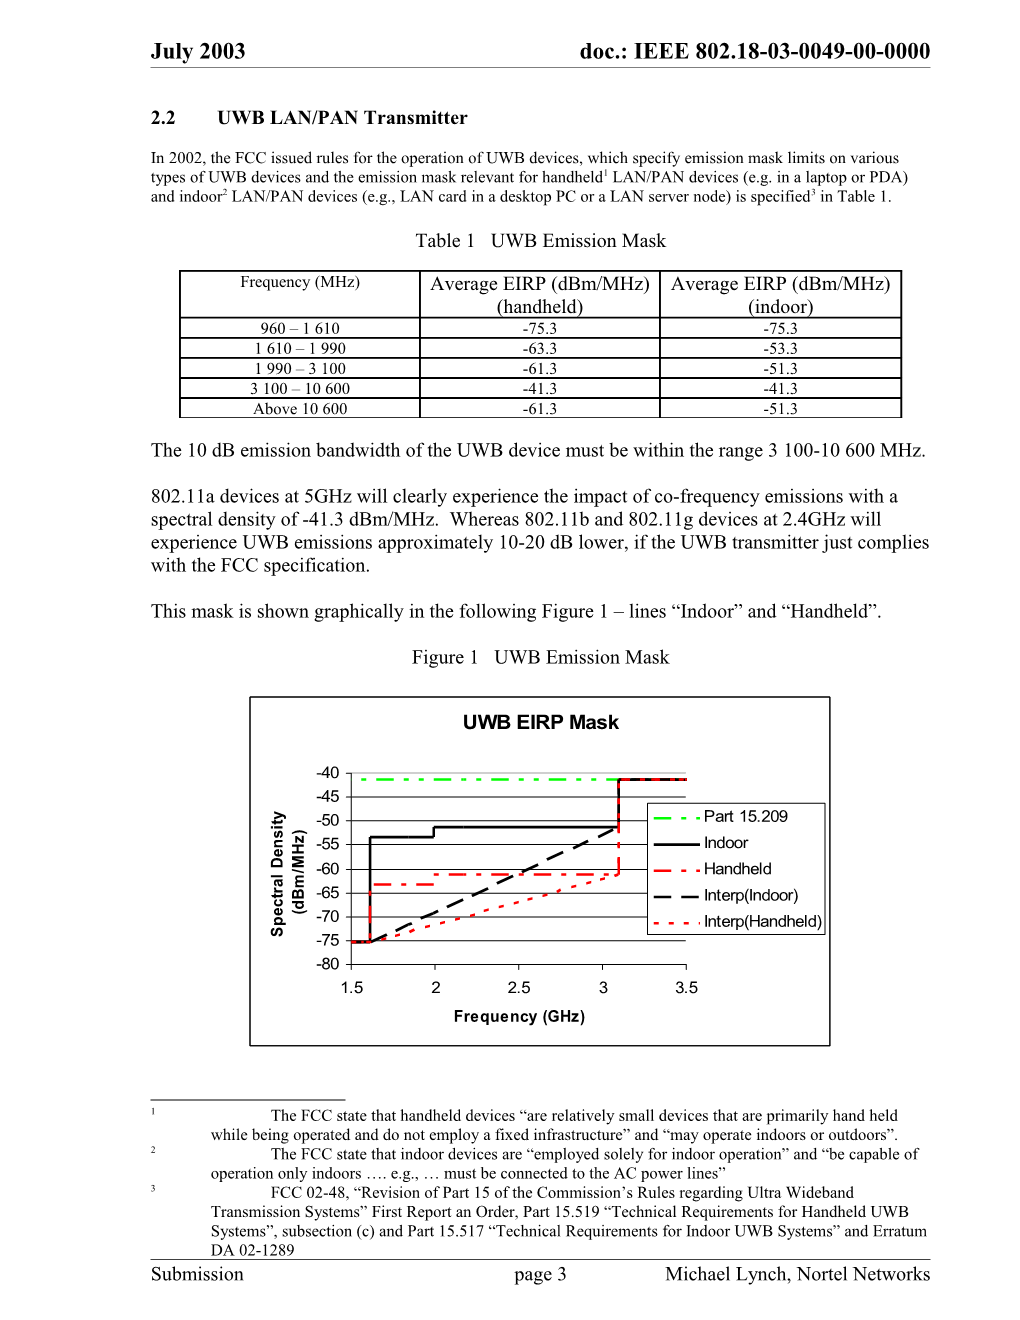 Estimate of Potential Interference from a Single UWB LAN /PAN Device Into an IEEE 802.11